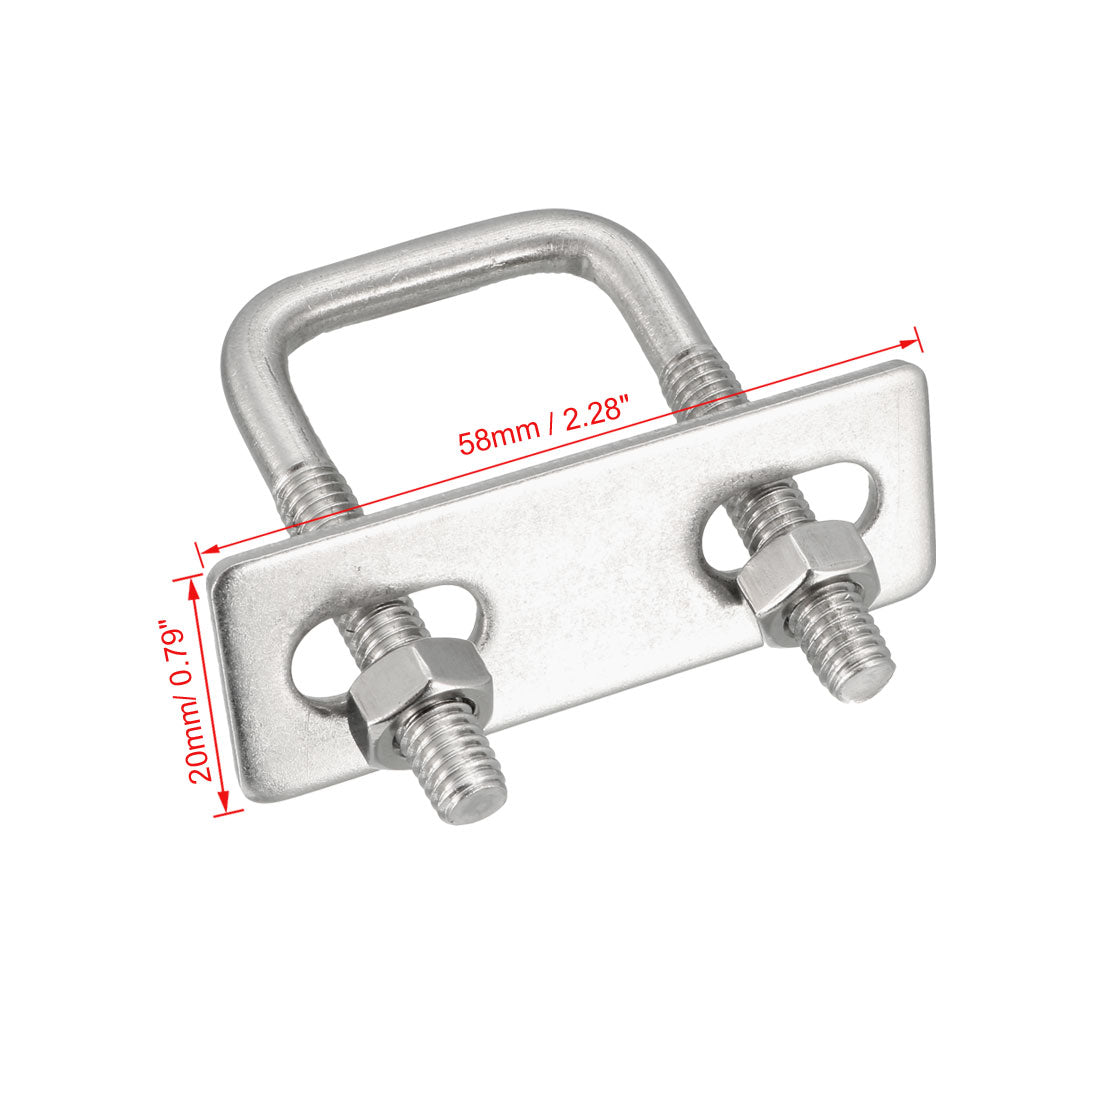 uxcell Uxcell Square U-Bolts 1"(25mm) Inner Width 304 Stainless Steel M6 with Nuts Frame Straps 2Pcs